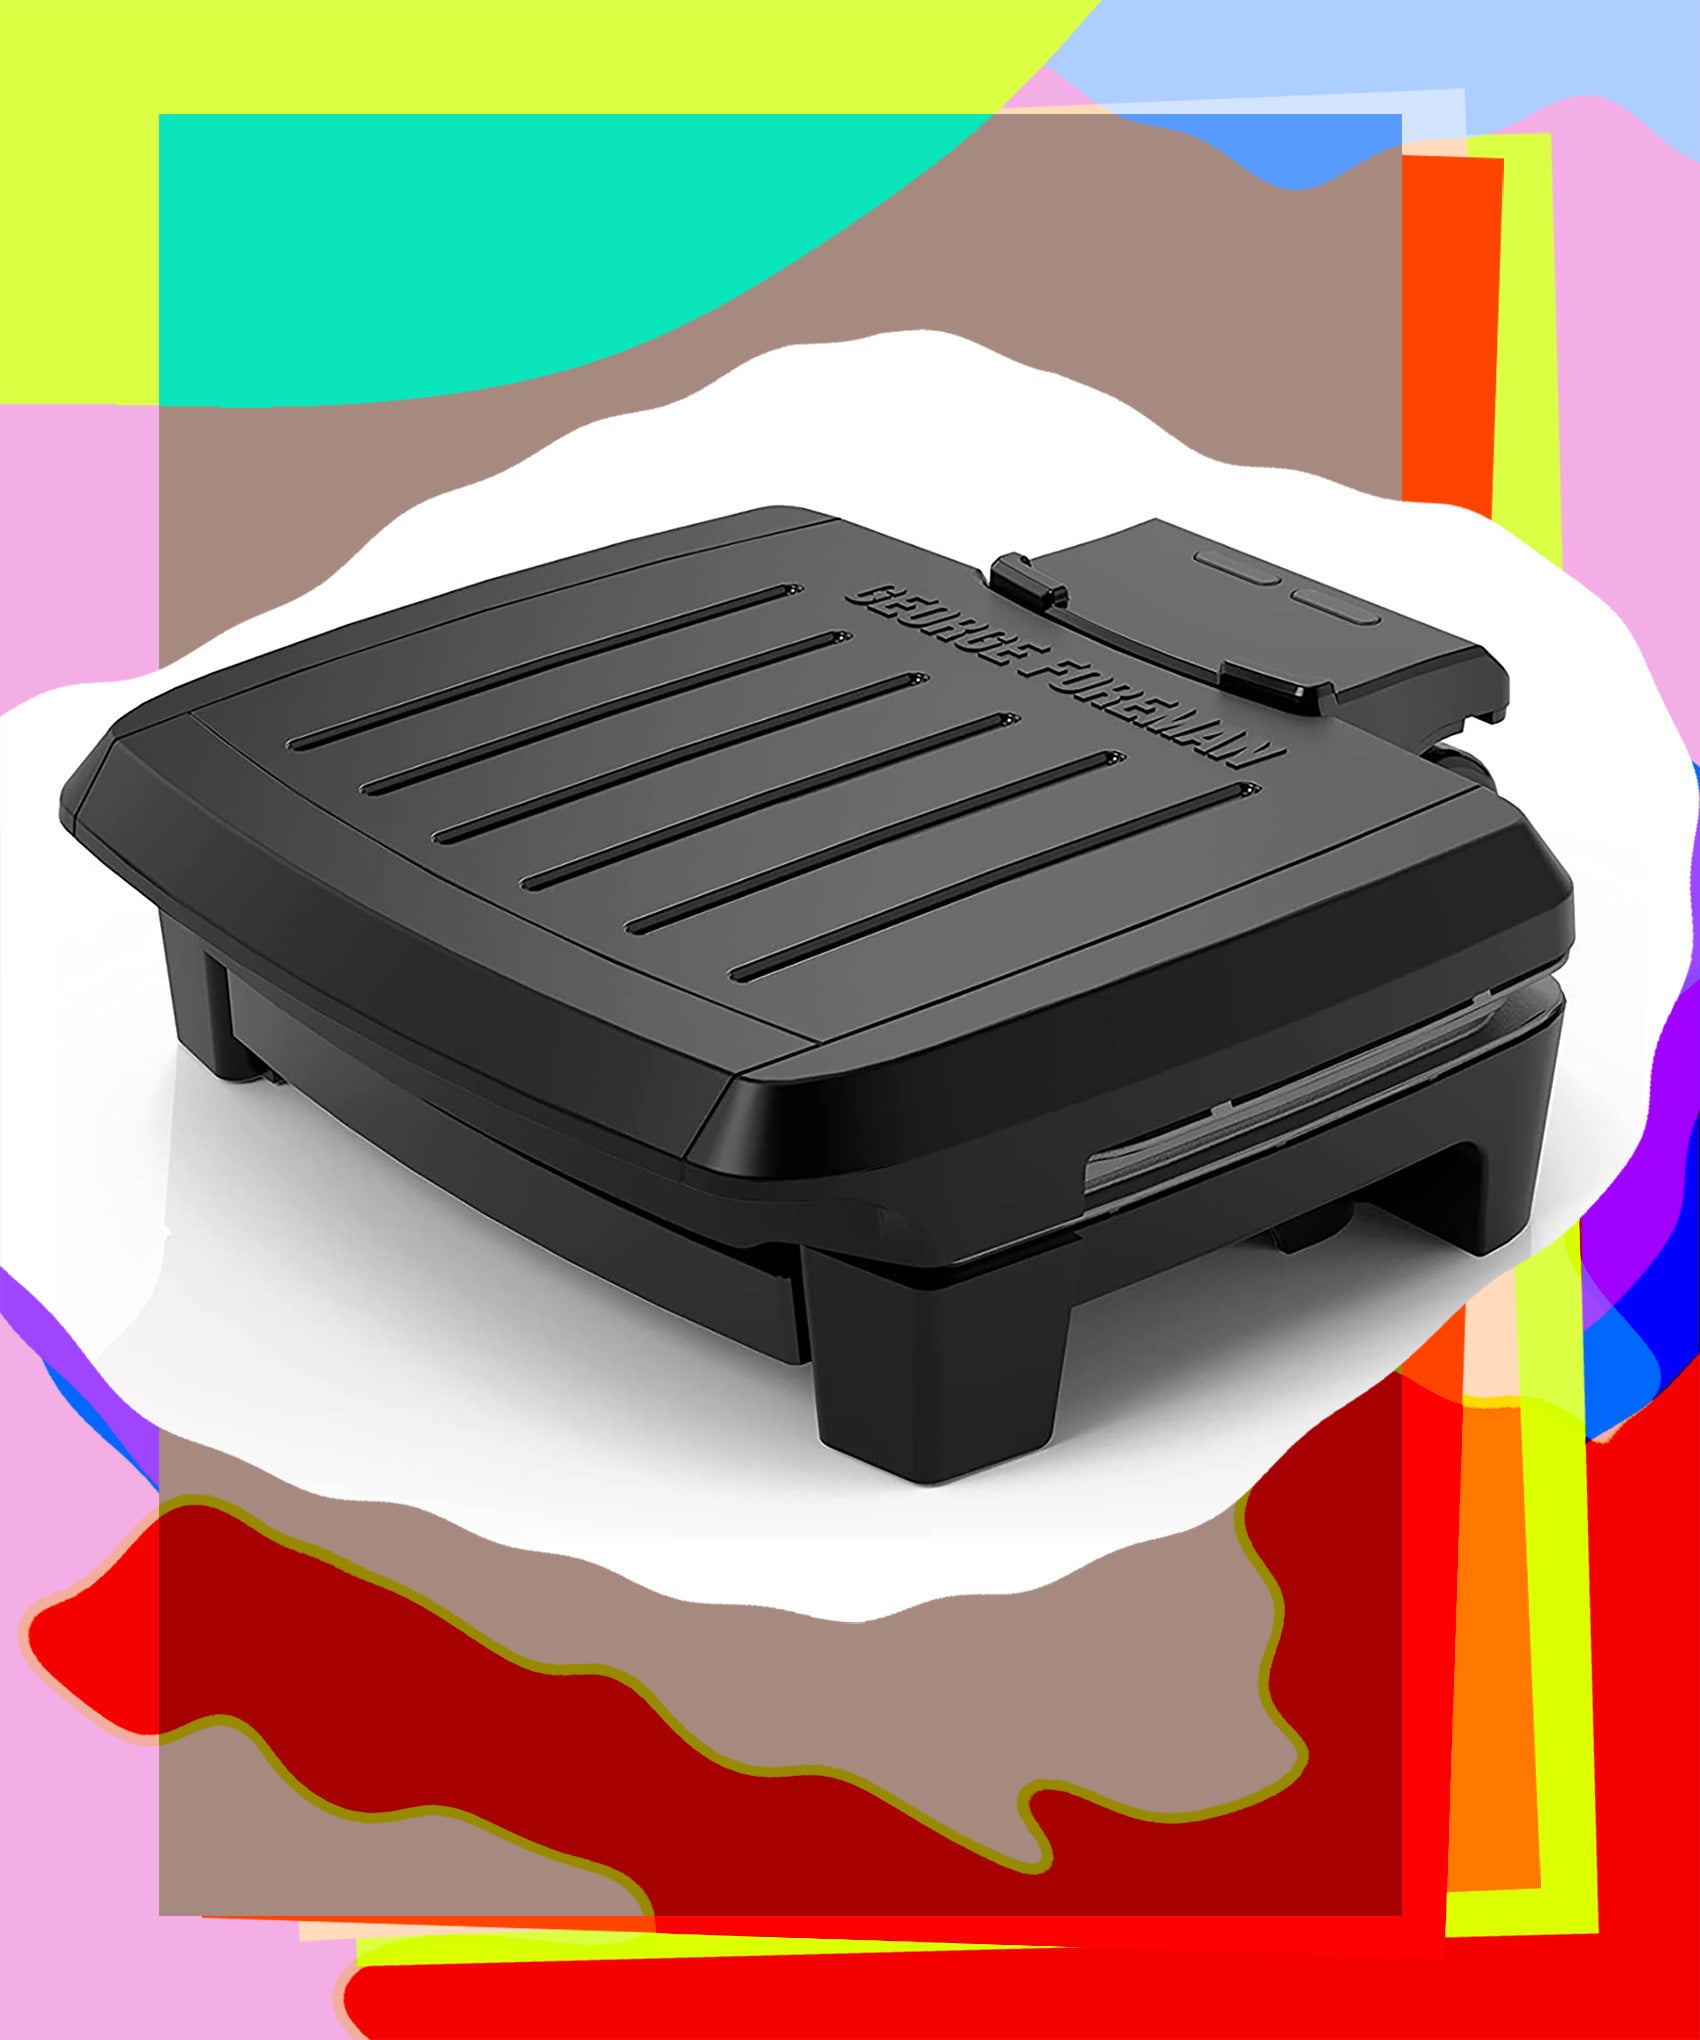 George Foreman Grill Cooking Times & Temp